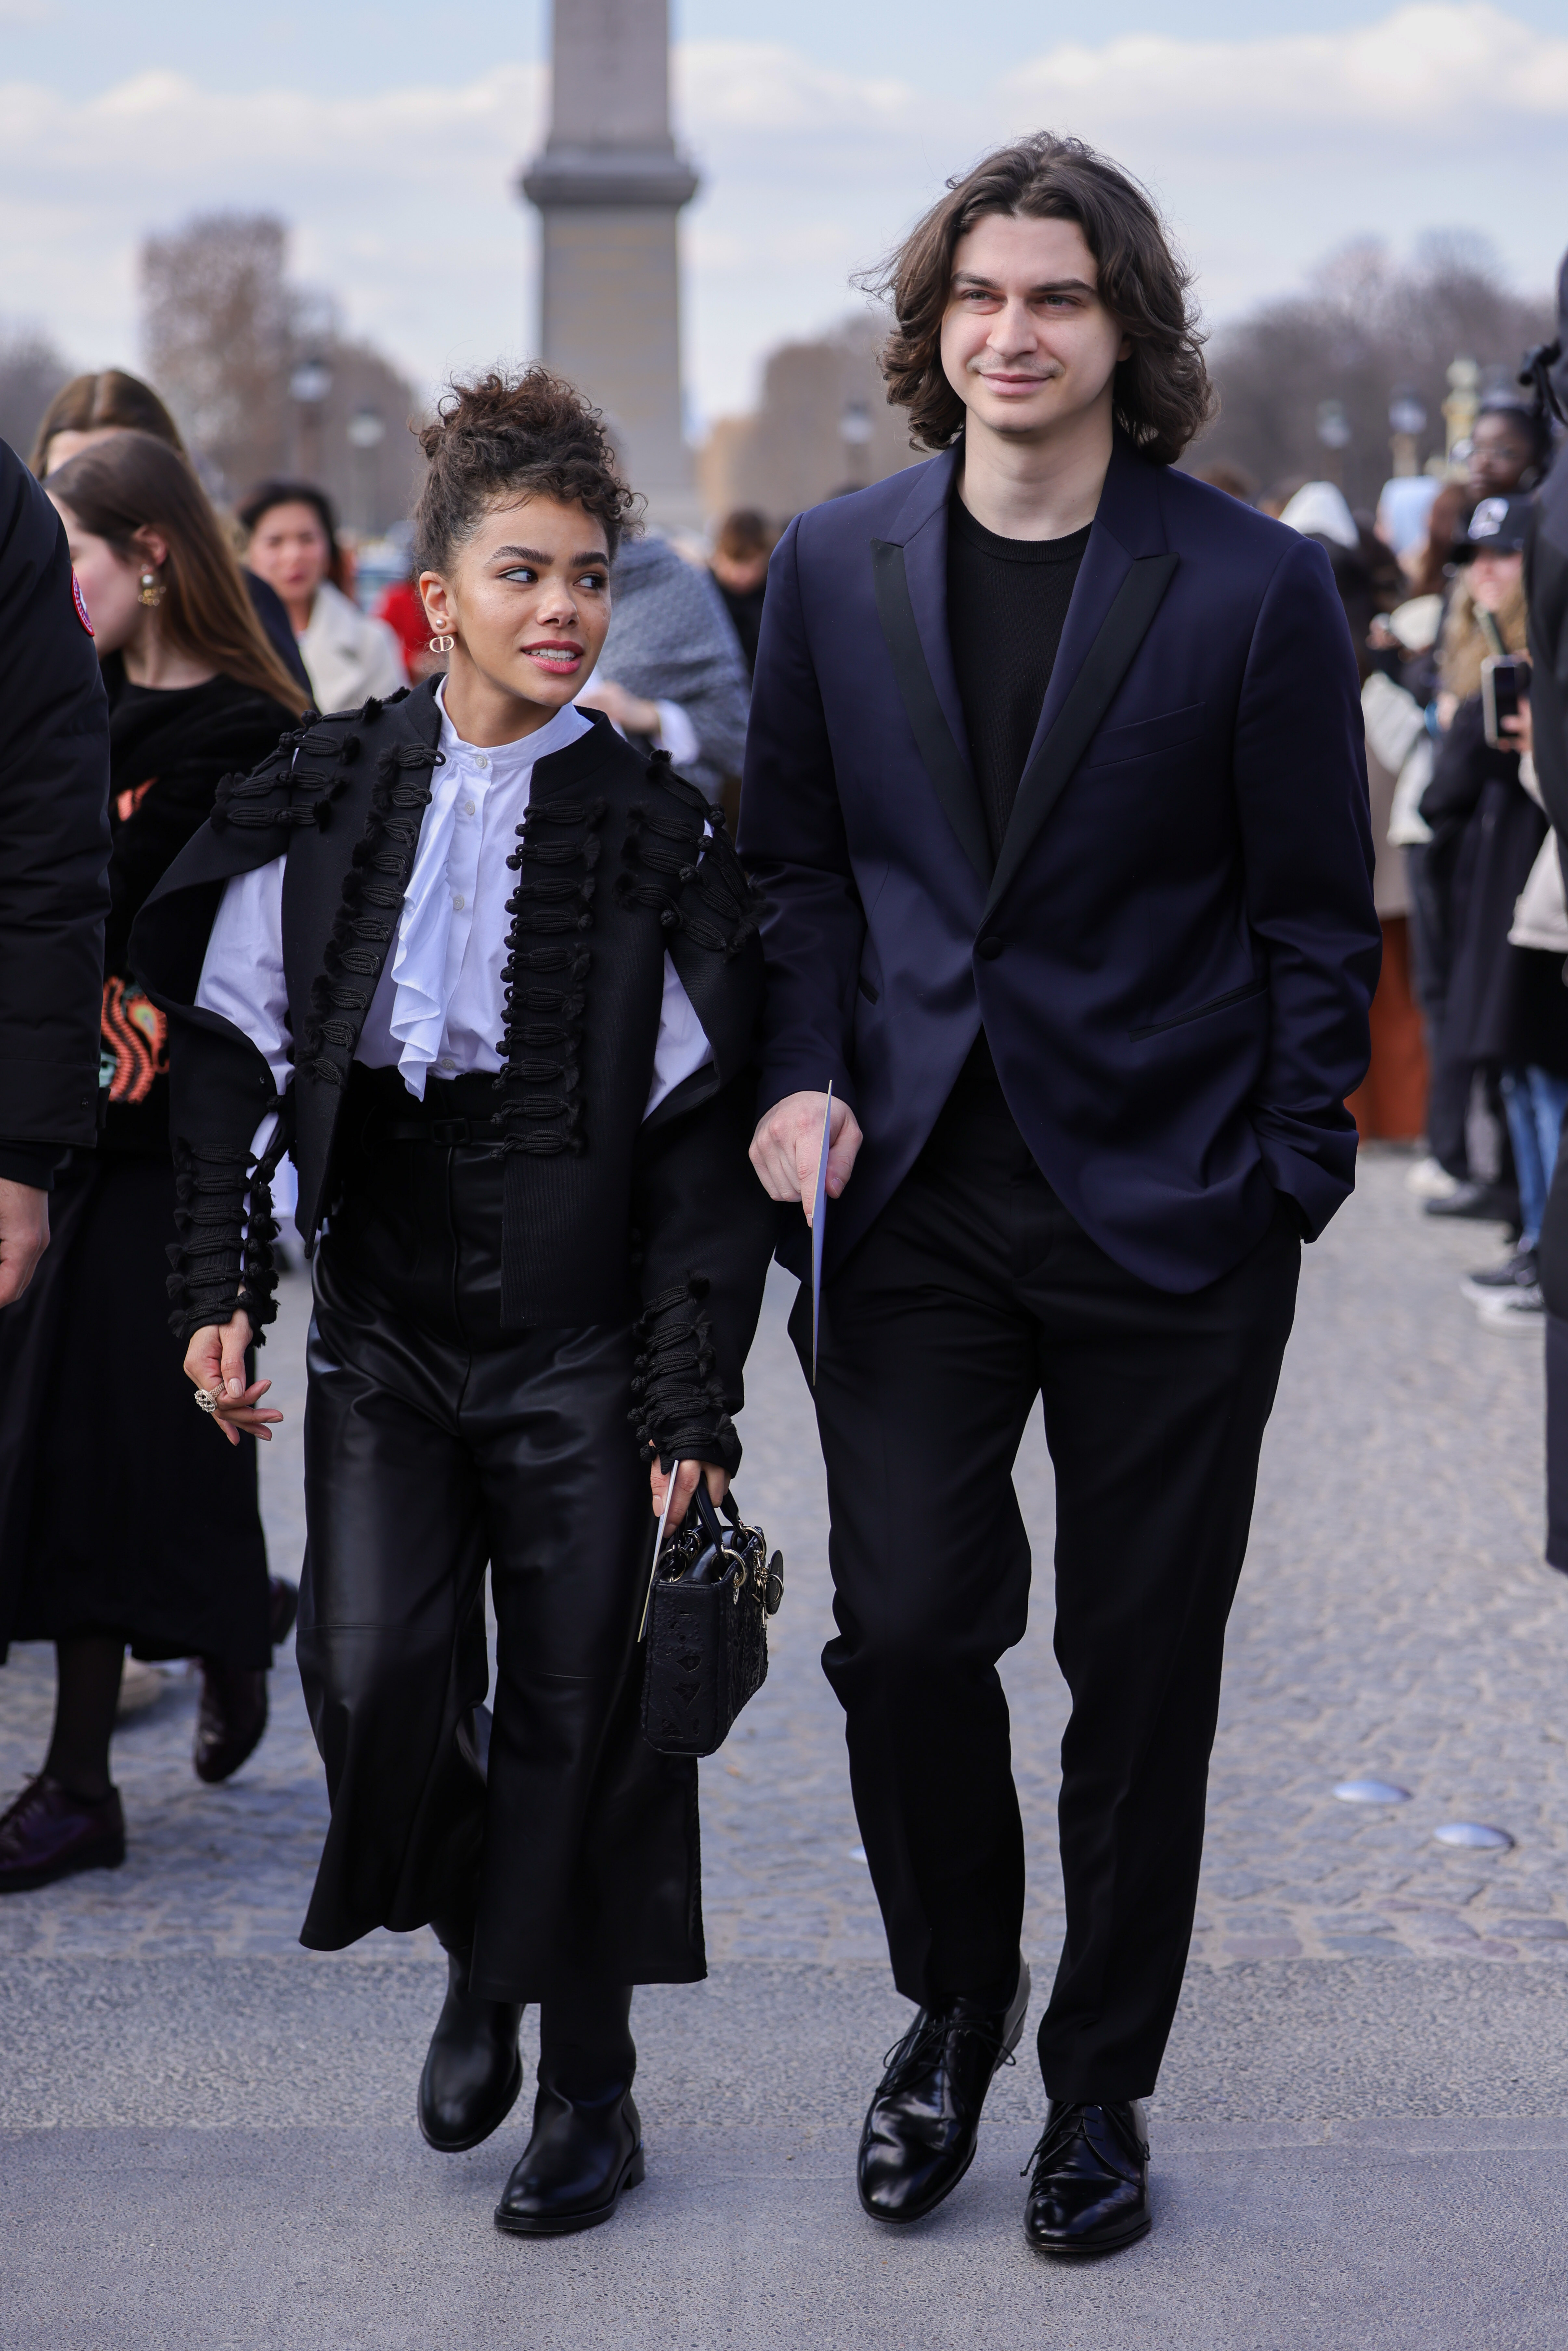 Antonia Gentry and Michael Debi attending Paris Fashion Week on February 28, 2023, in Paris, France. | Source: Getty Images